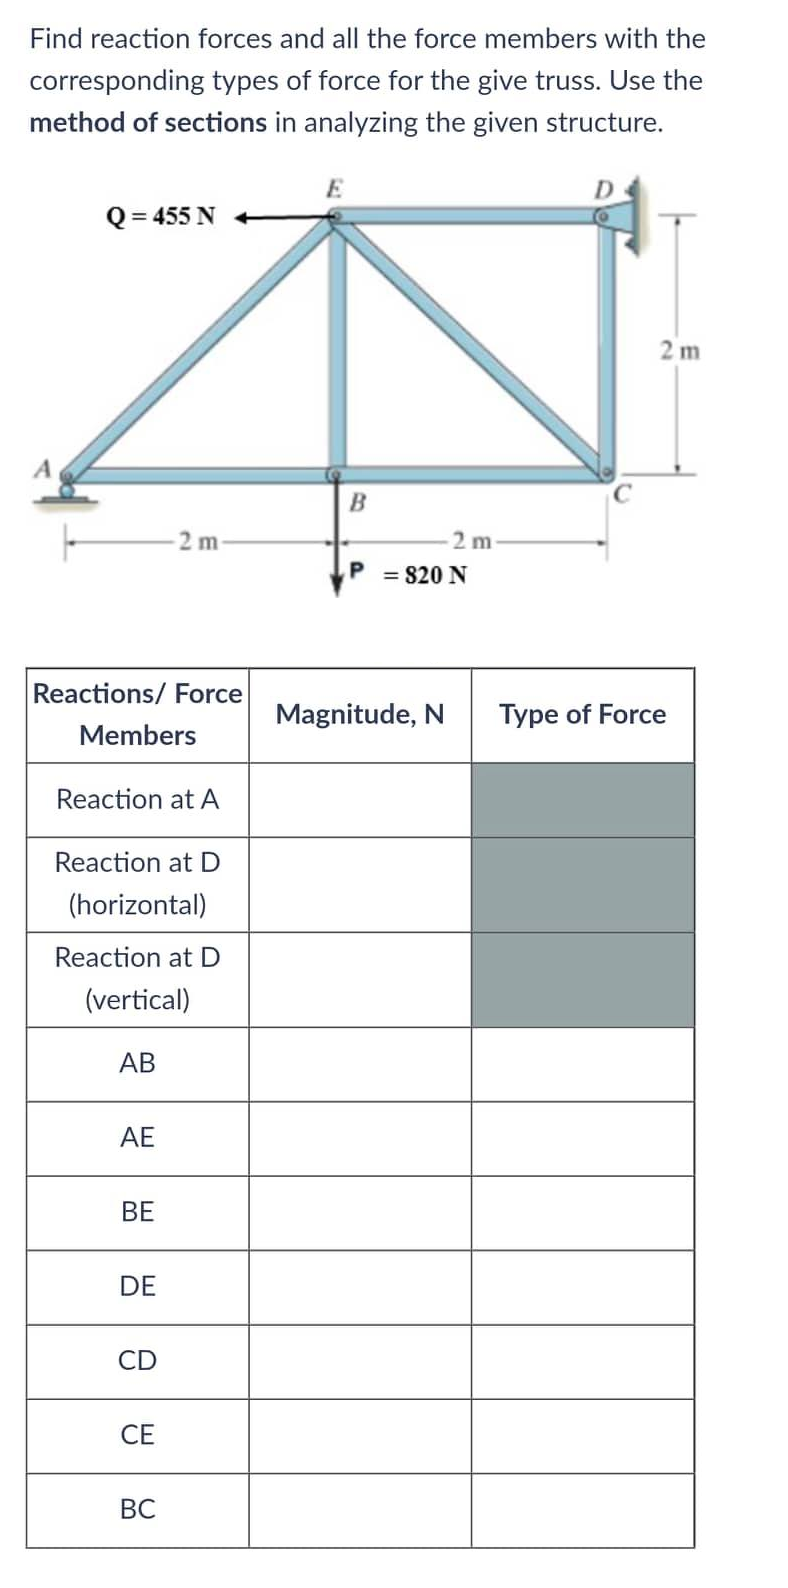 Find reaction forces and all the force members with the
corresponding types of force for the give truss. Use the
method of sections in analyzing the given structure.
E
D
Q = 455 N
2 m
Reactions/ Force
Members
Reaction at A
Reaction at D
(horizontal)
Reaction at D
(vertical)
AB
AE
BE
DE
CD
CE
BC
B
P = 820 N
Magnitude, N
2 m-
2m
Type of Force